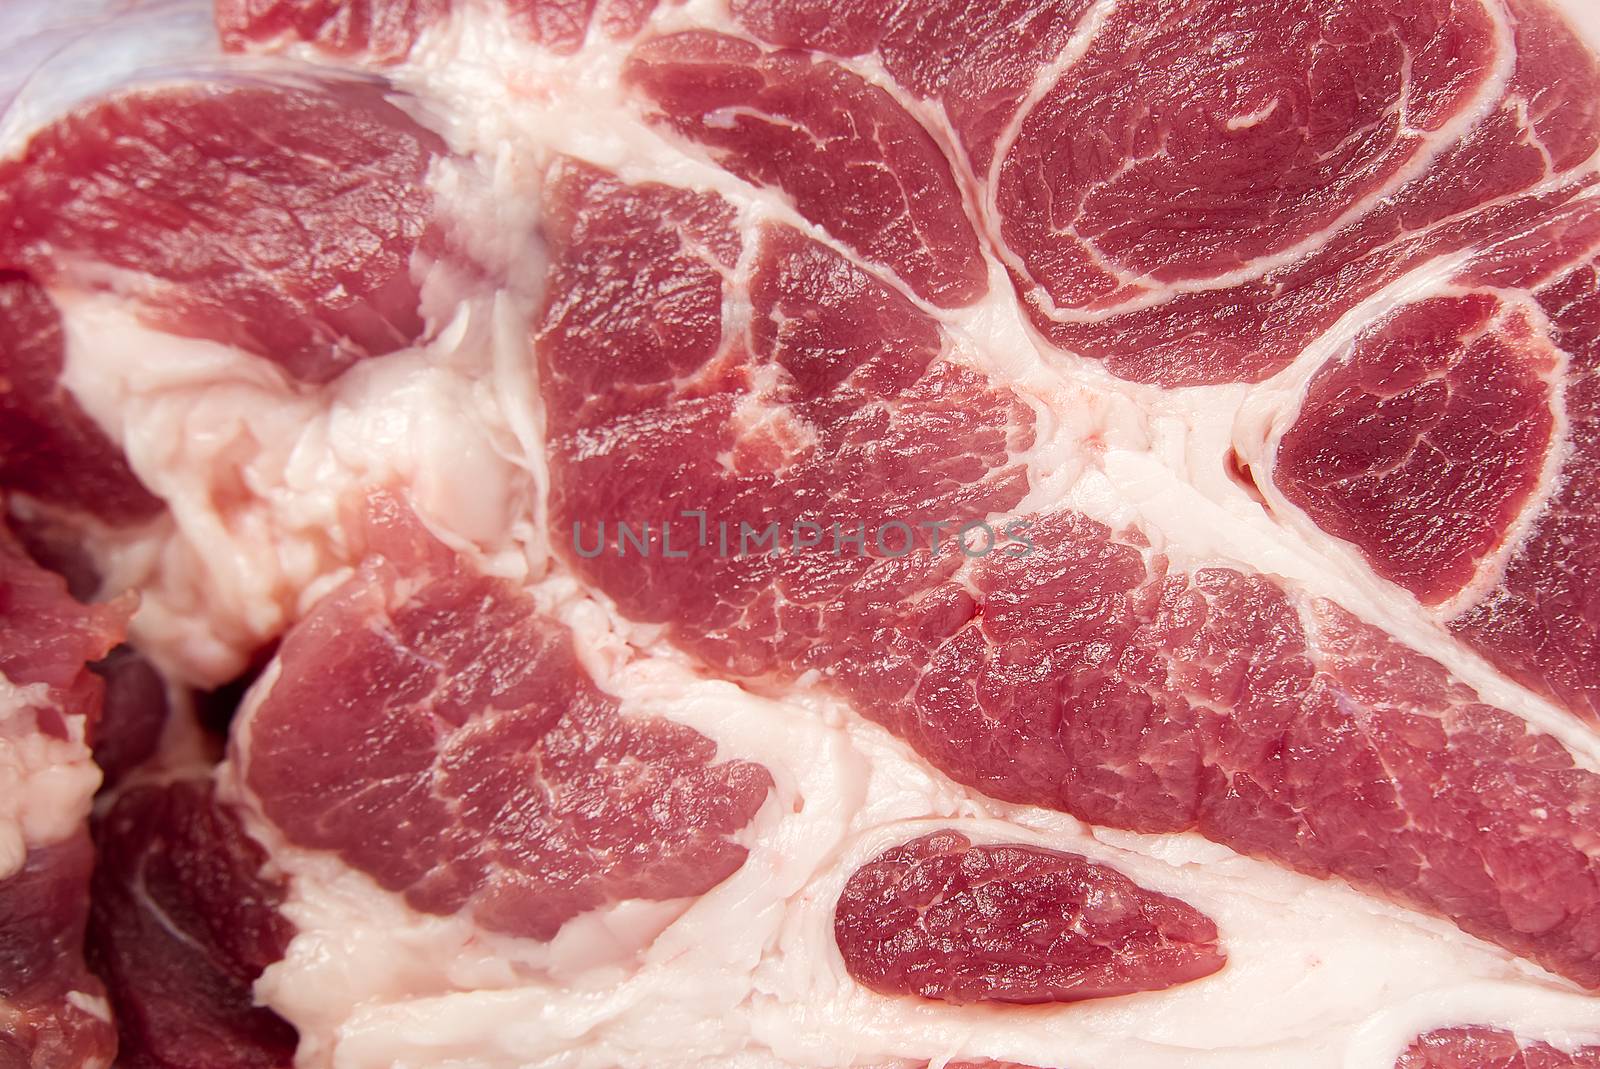 fresh raw pork meat texture, can be used as background